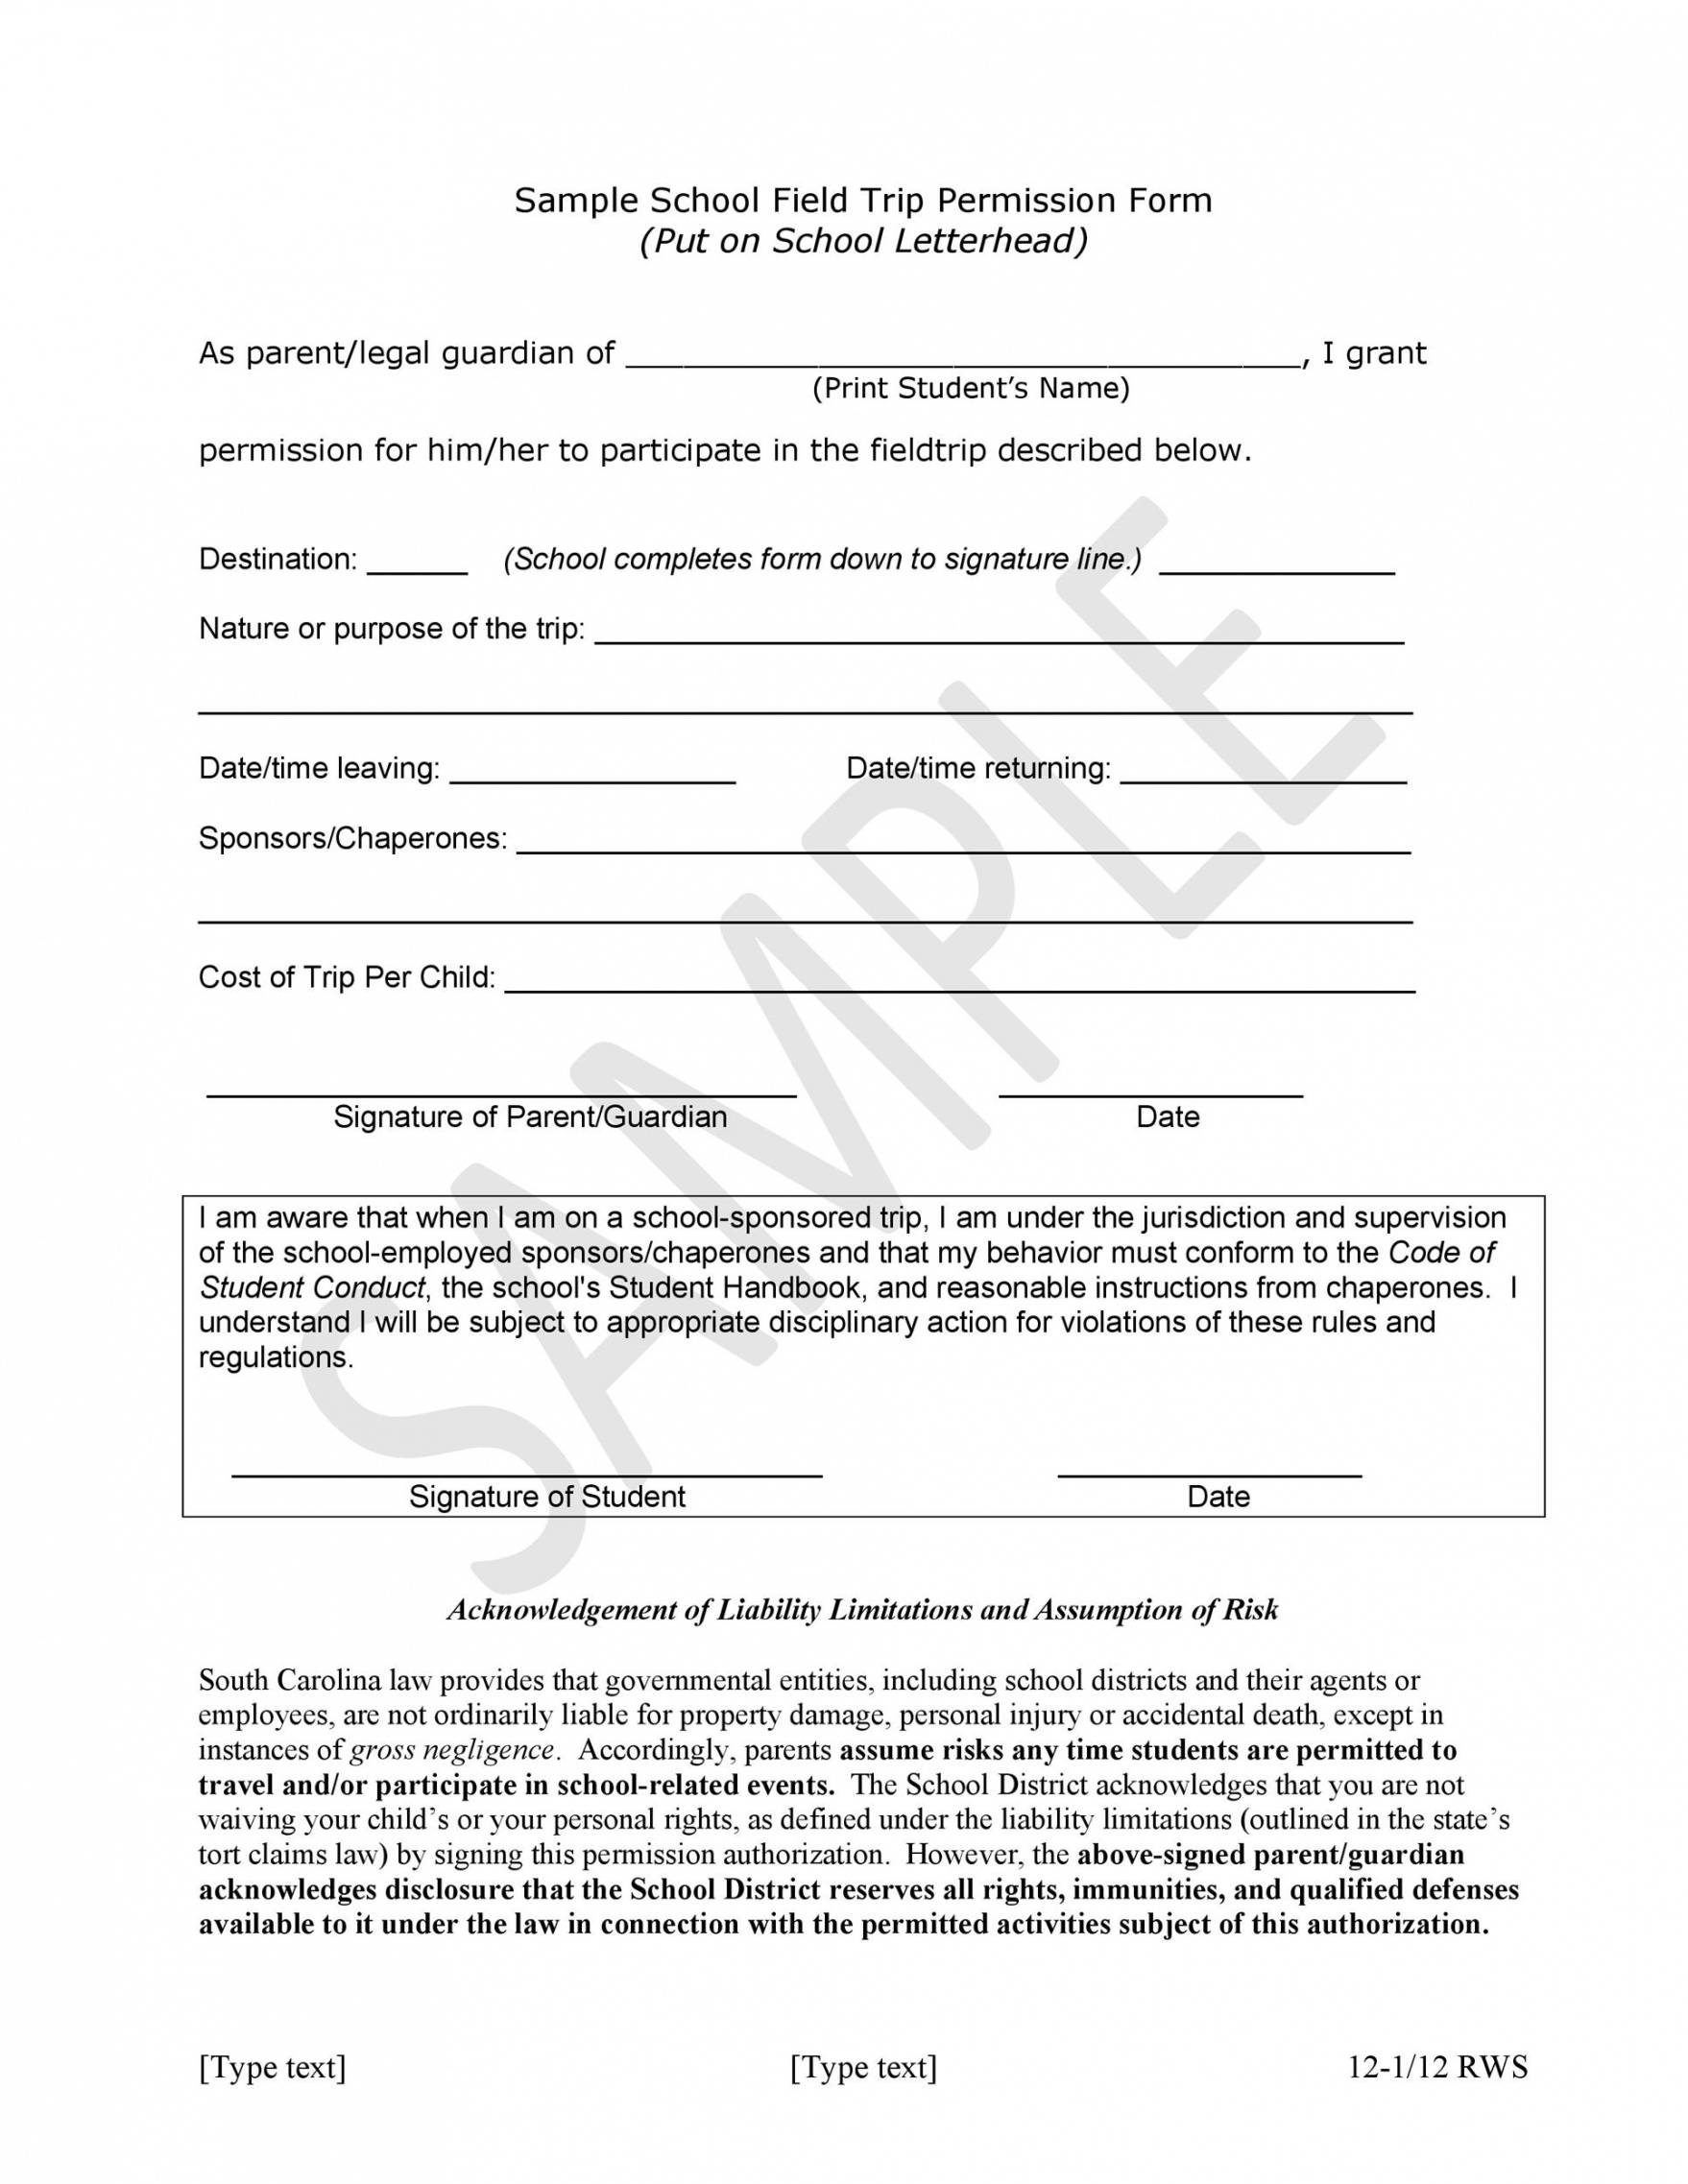 printable 35 permission slip templates &amp; field trip forms field trip release form template pdf